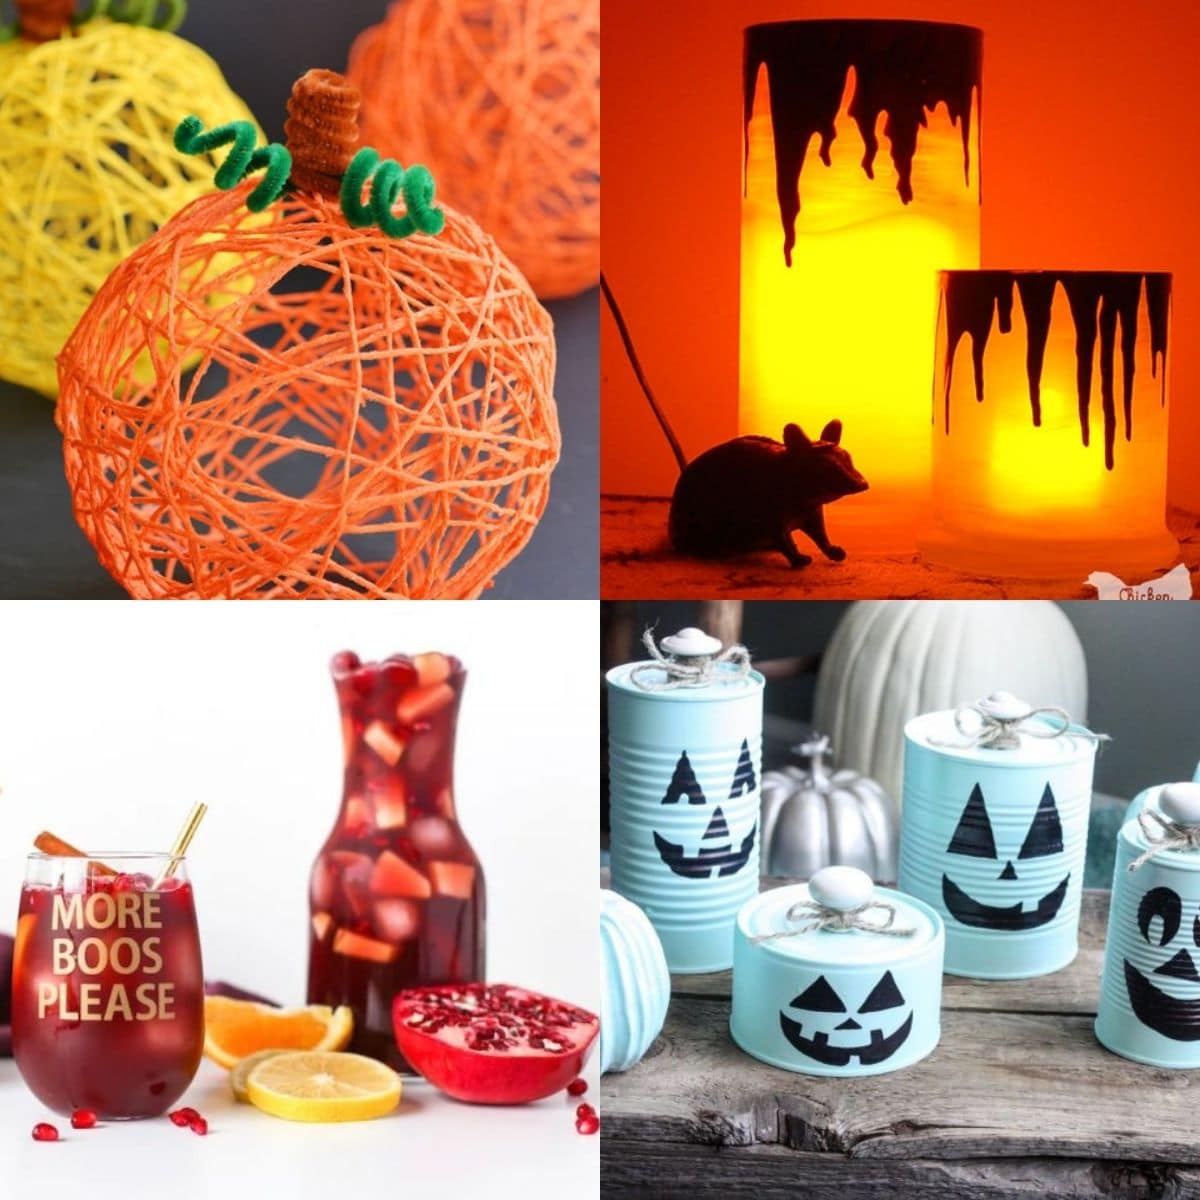 20-fun-halloween-crafts-for-adults-craftsy-hacks